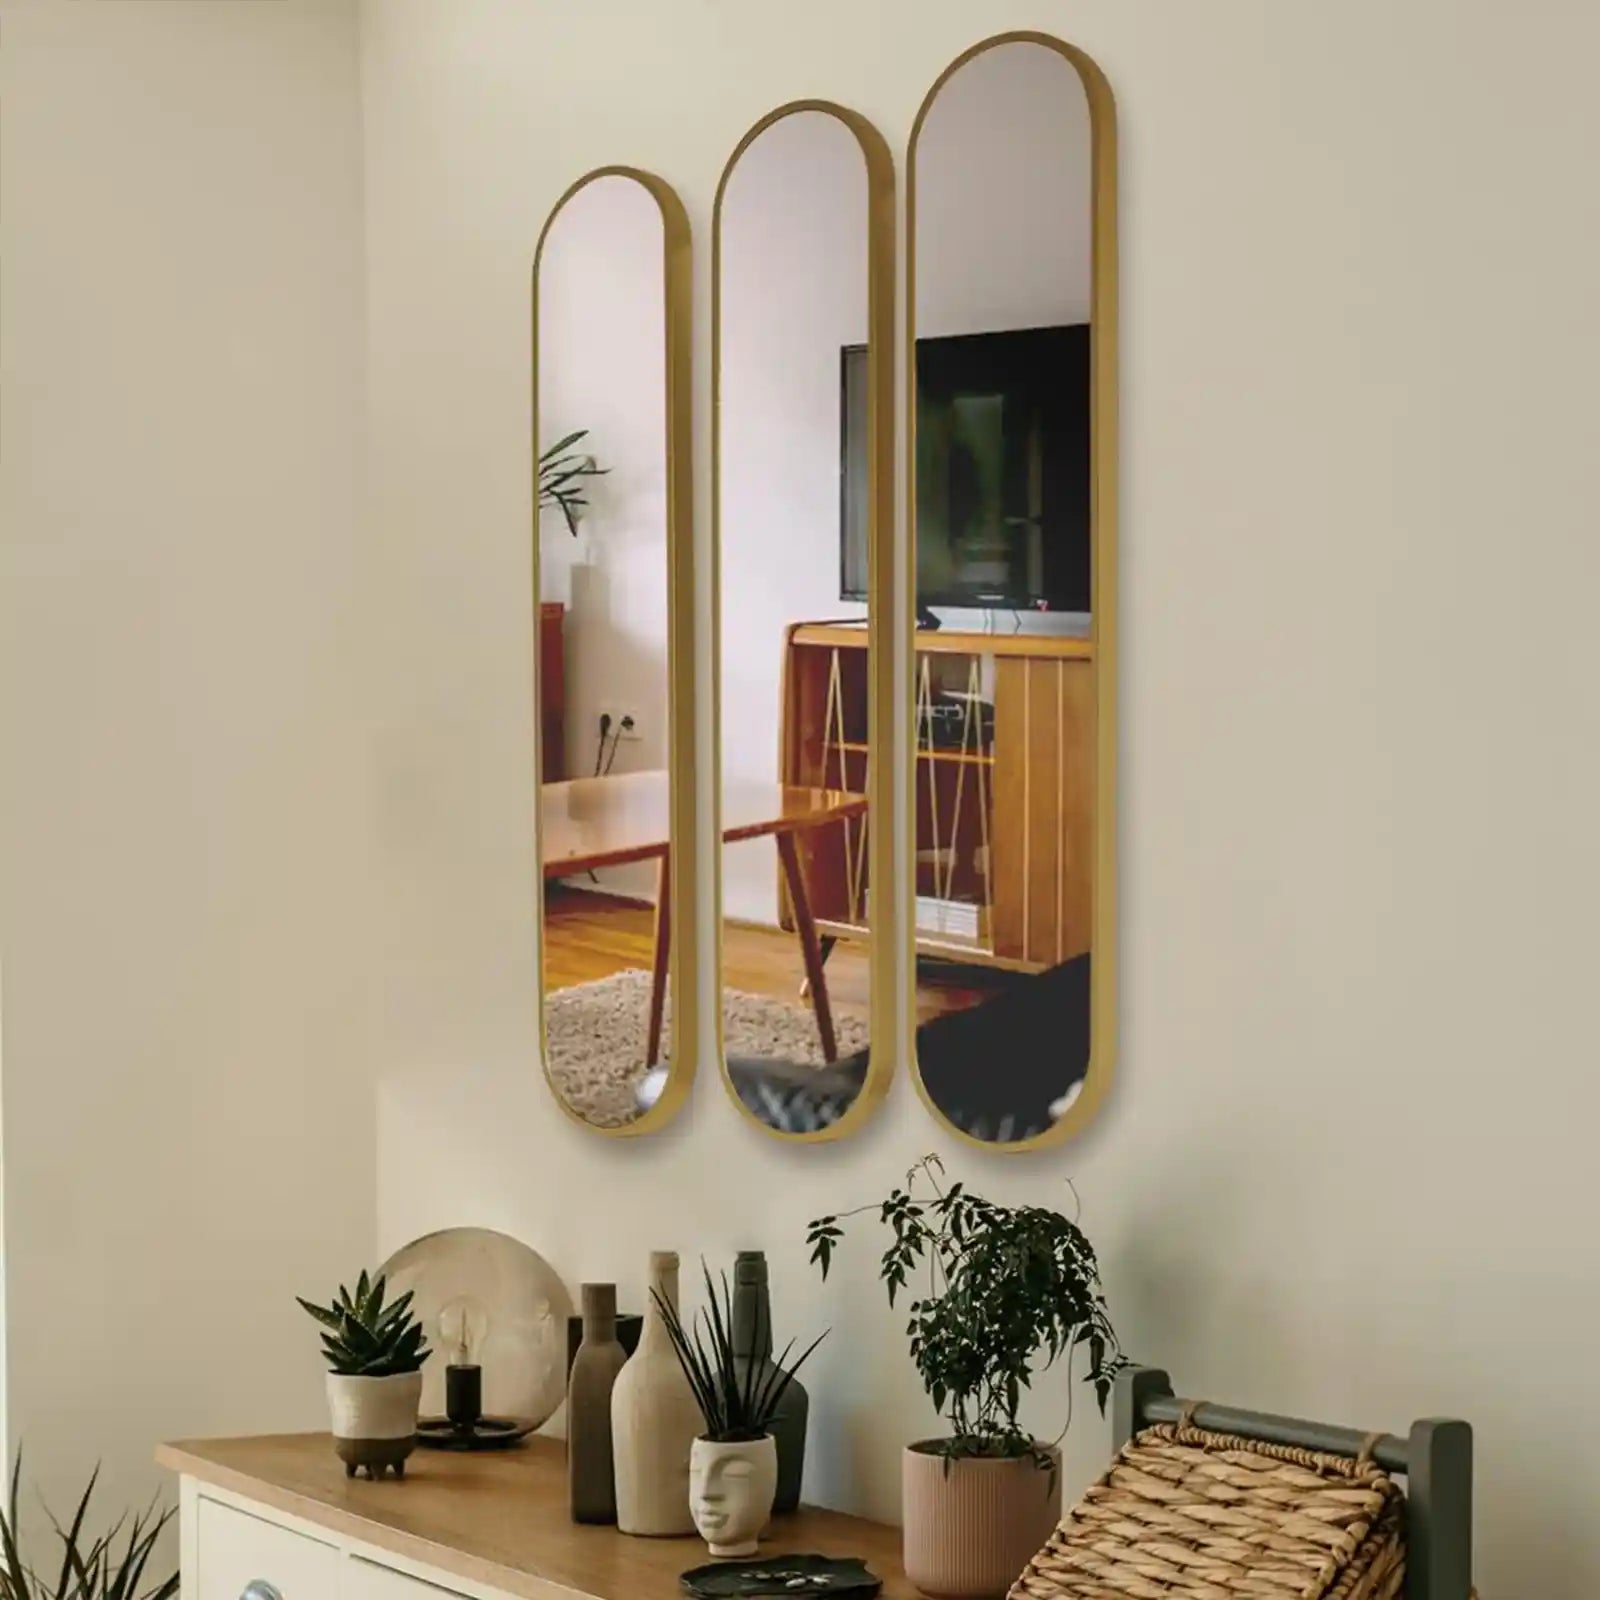 Decorative Oval Gold Mirror Set of 3, 40" x 8" Modern Gold Wall Mirror for Home, Bathroom, Living Room